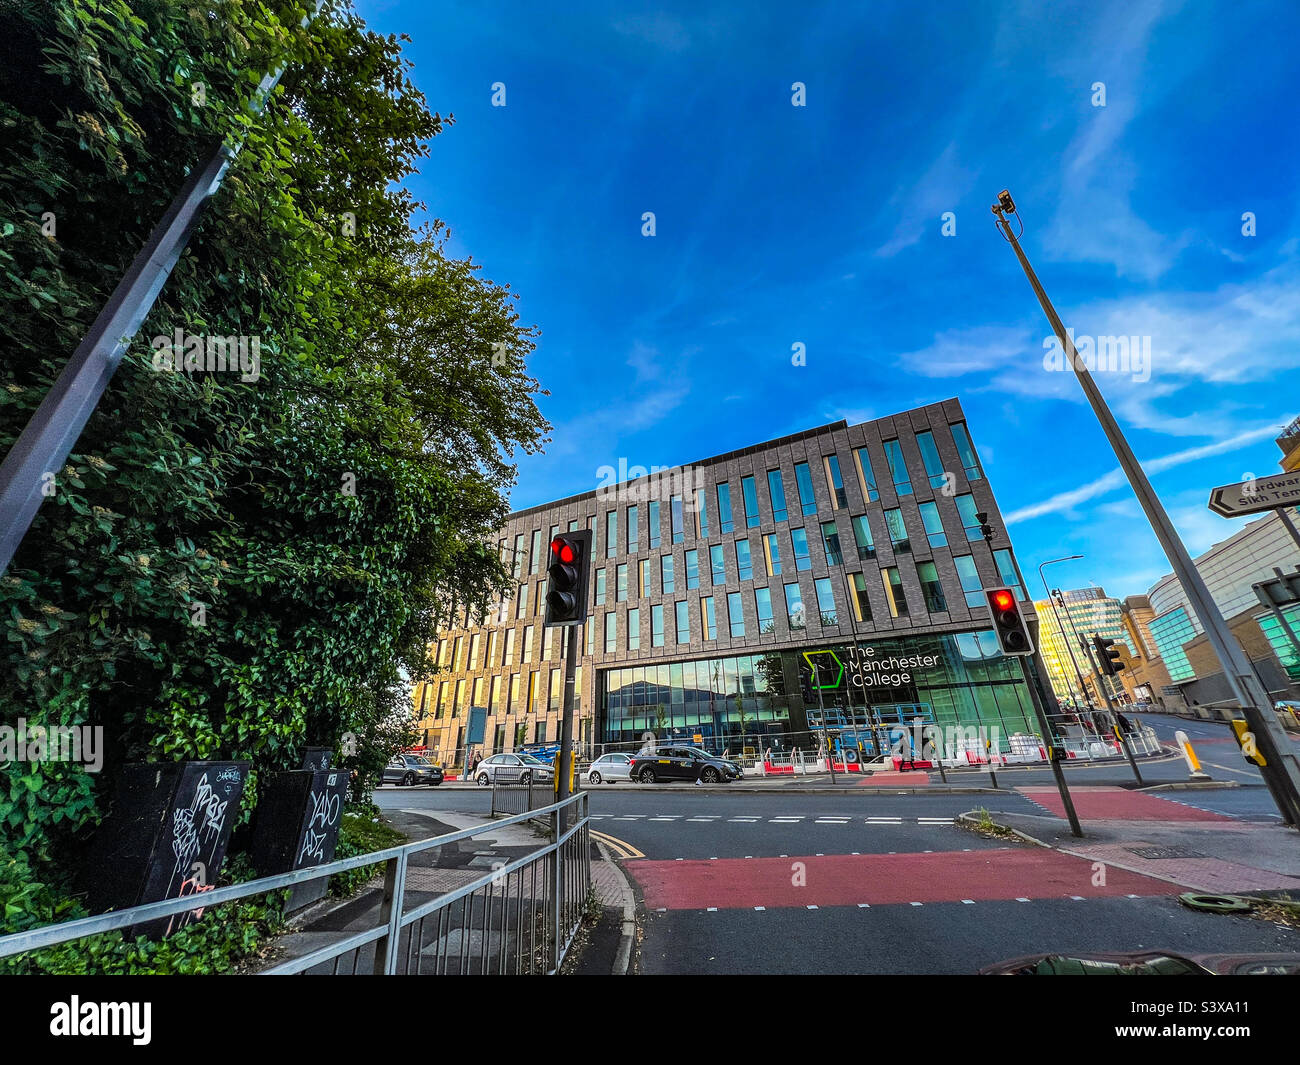 The Manchester College on trinity way in Manchester City centre Stock Photo